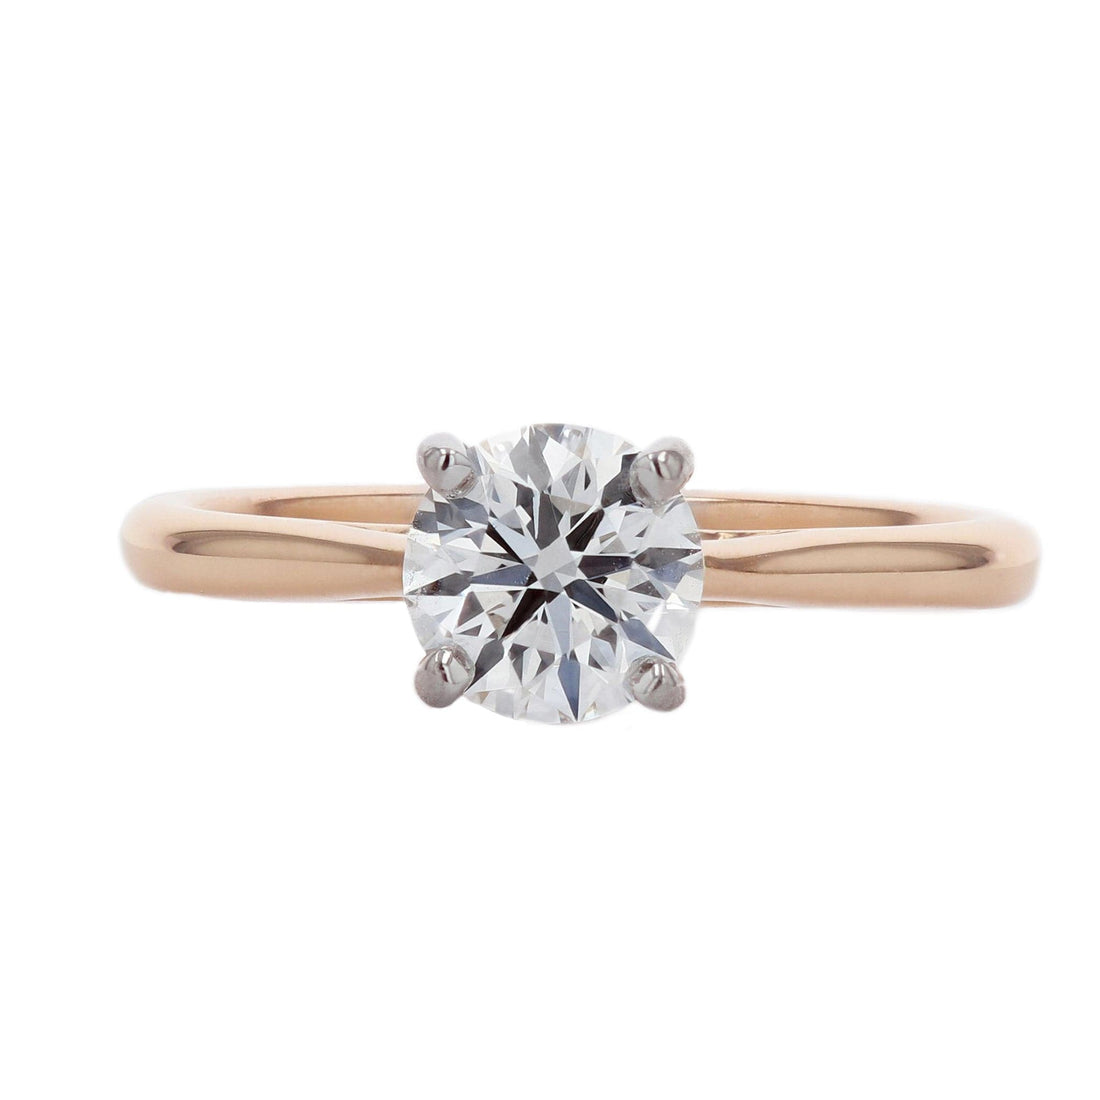 18k Rose Gold Diamond Solitaire Engagement Ring by Precision Set - Skeie's Jewelers